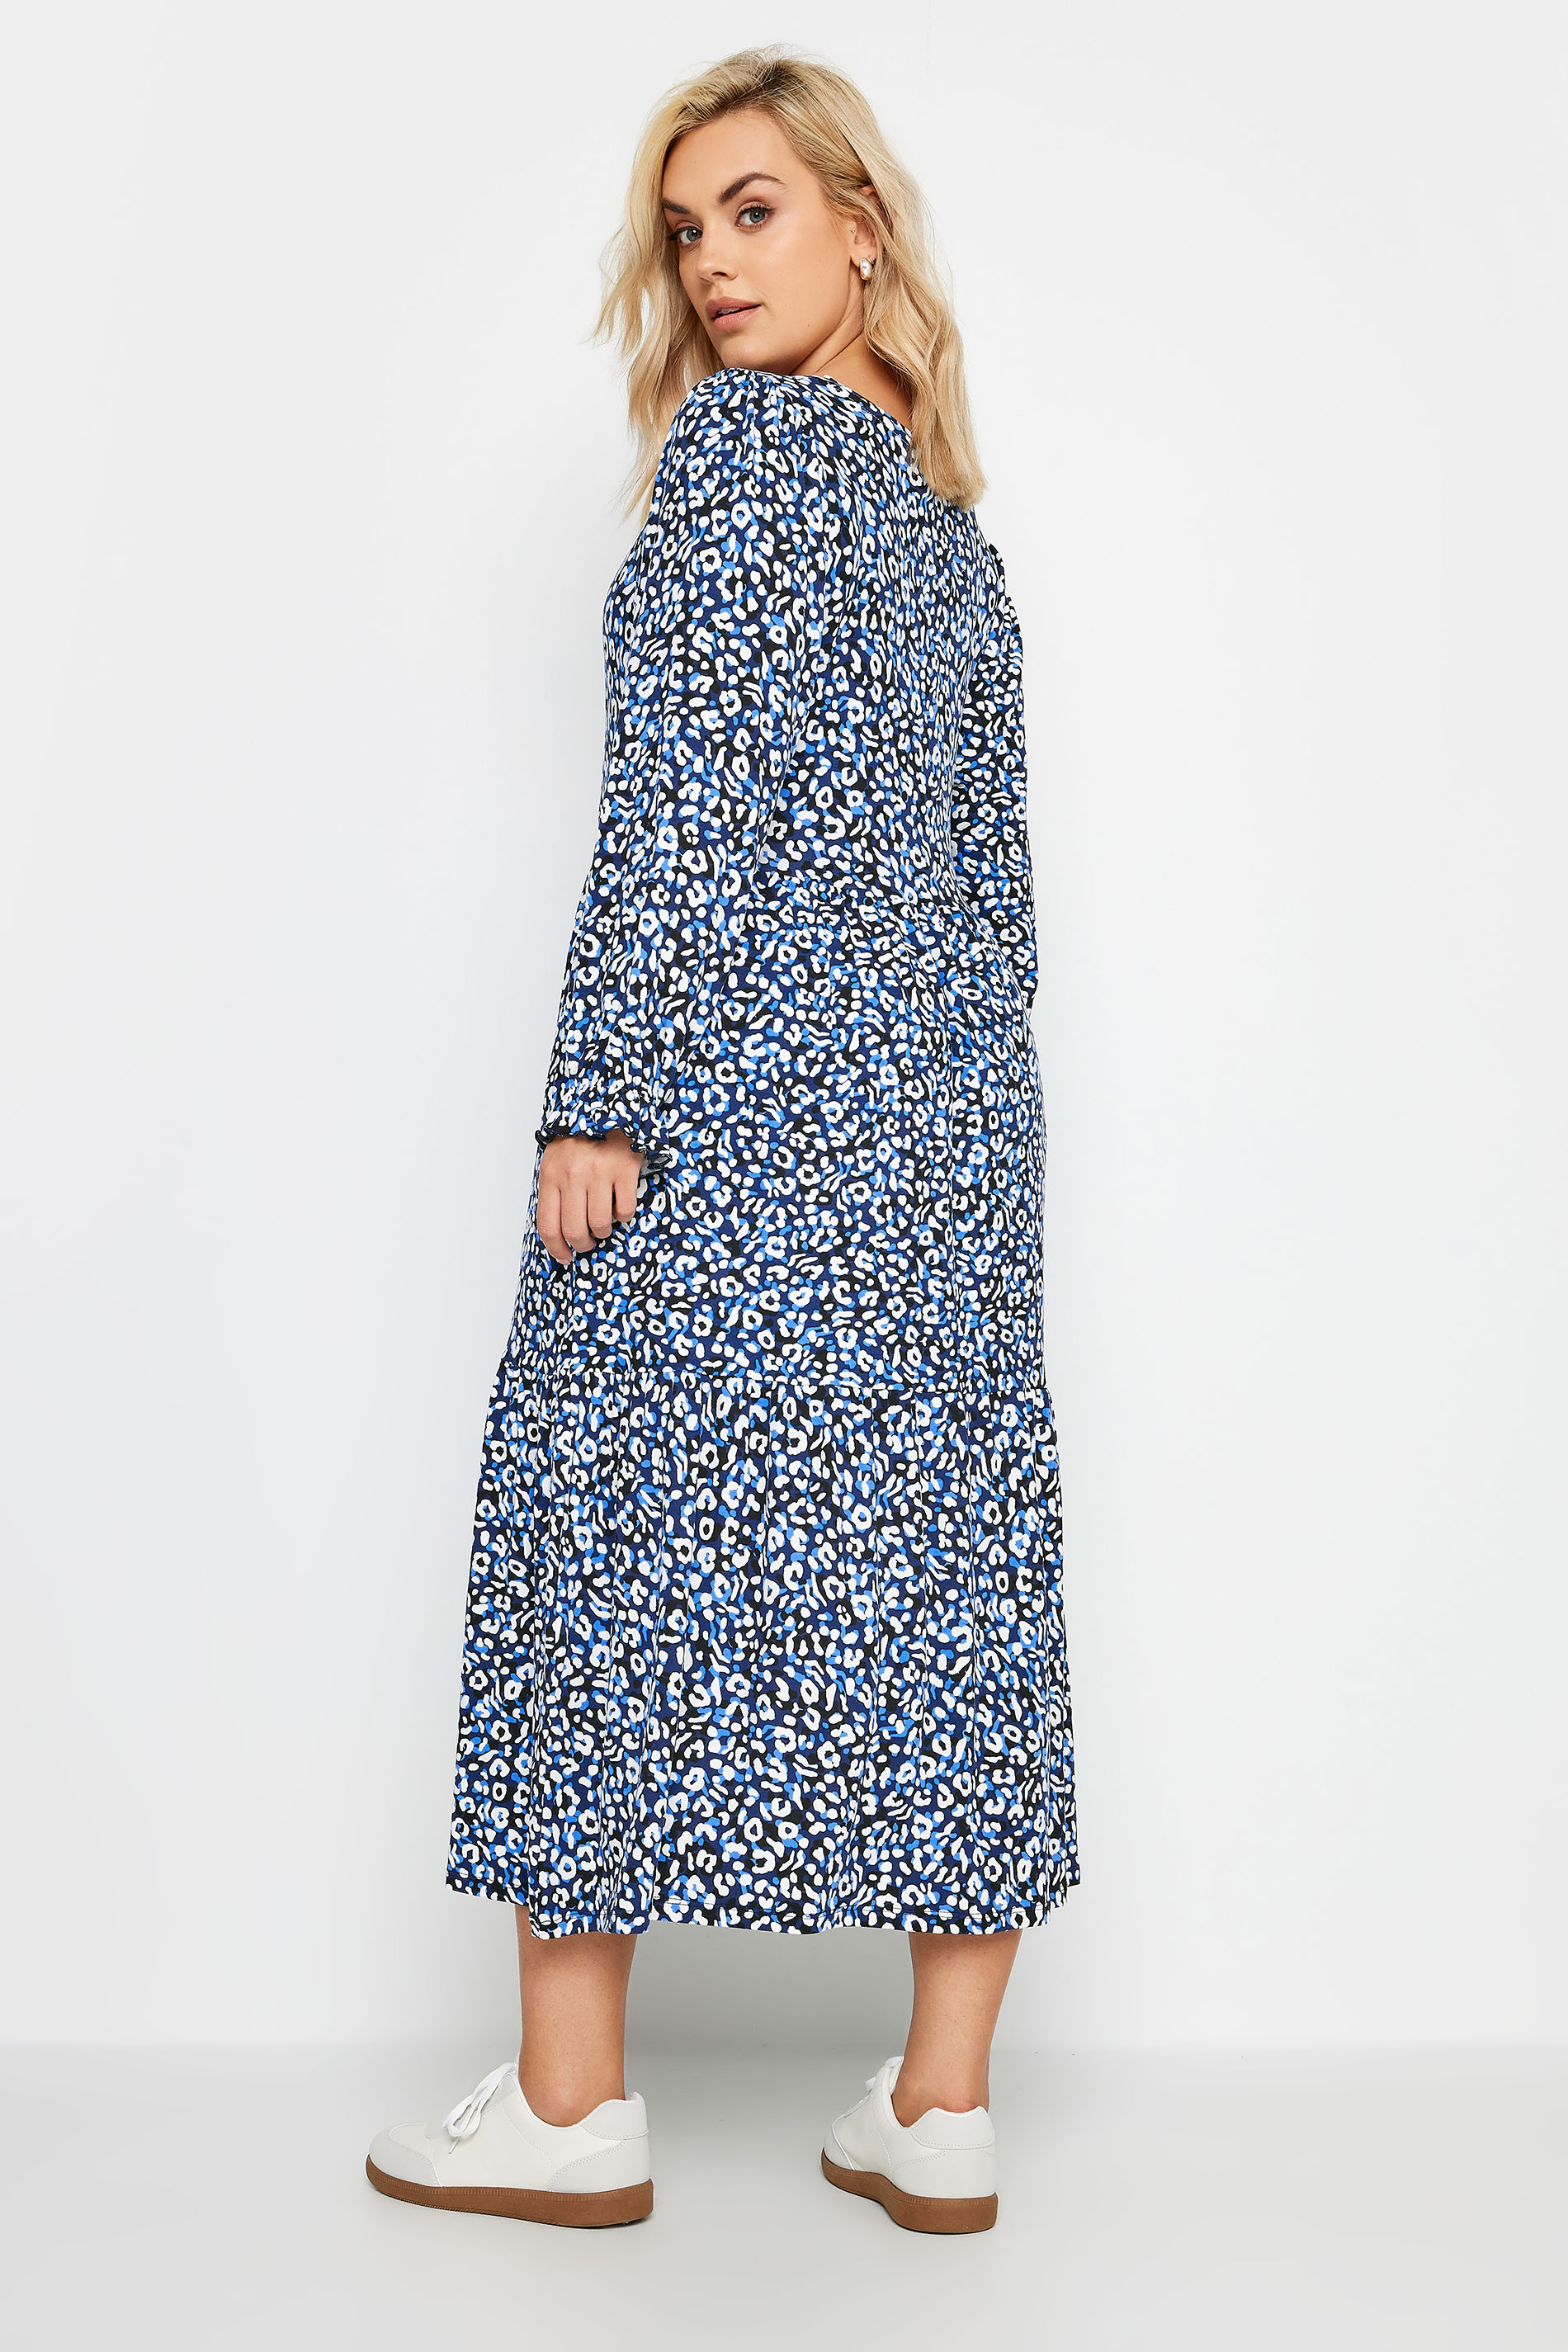 YOURS Plus Size Blue Leopard Print Midaxi Dress | Yours Clothing 3